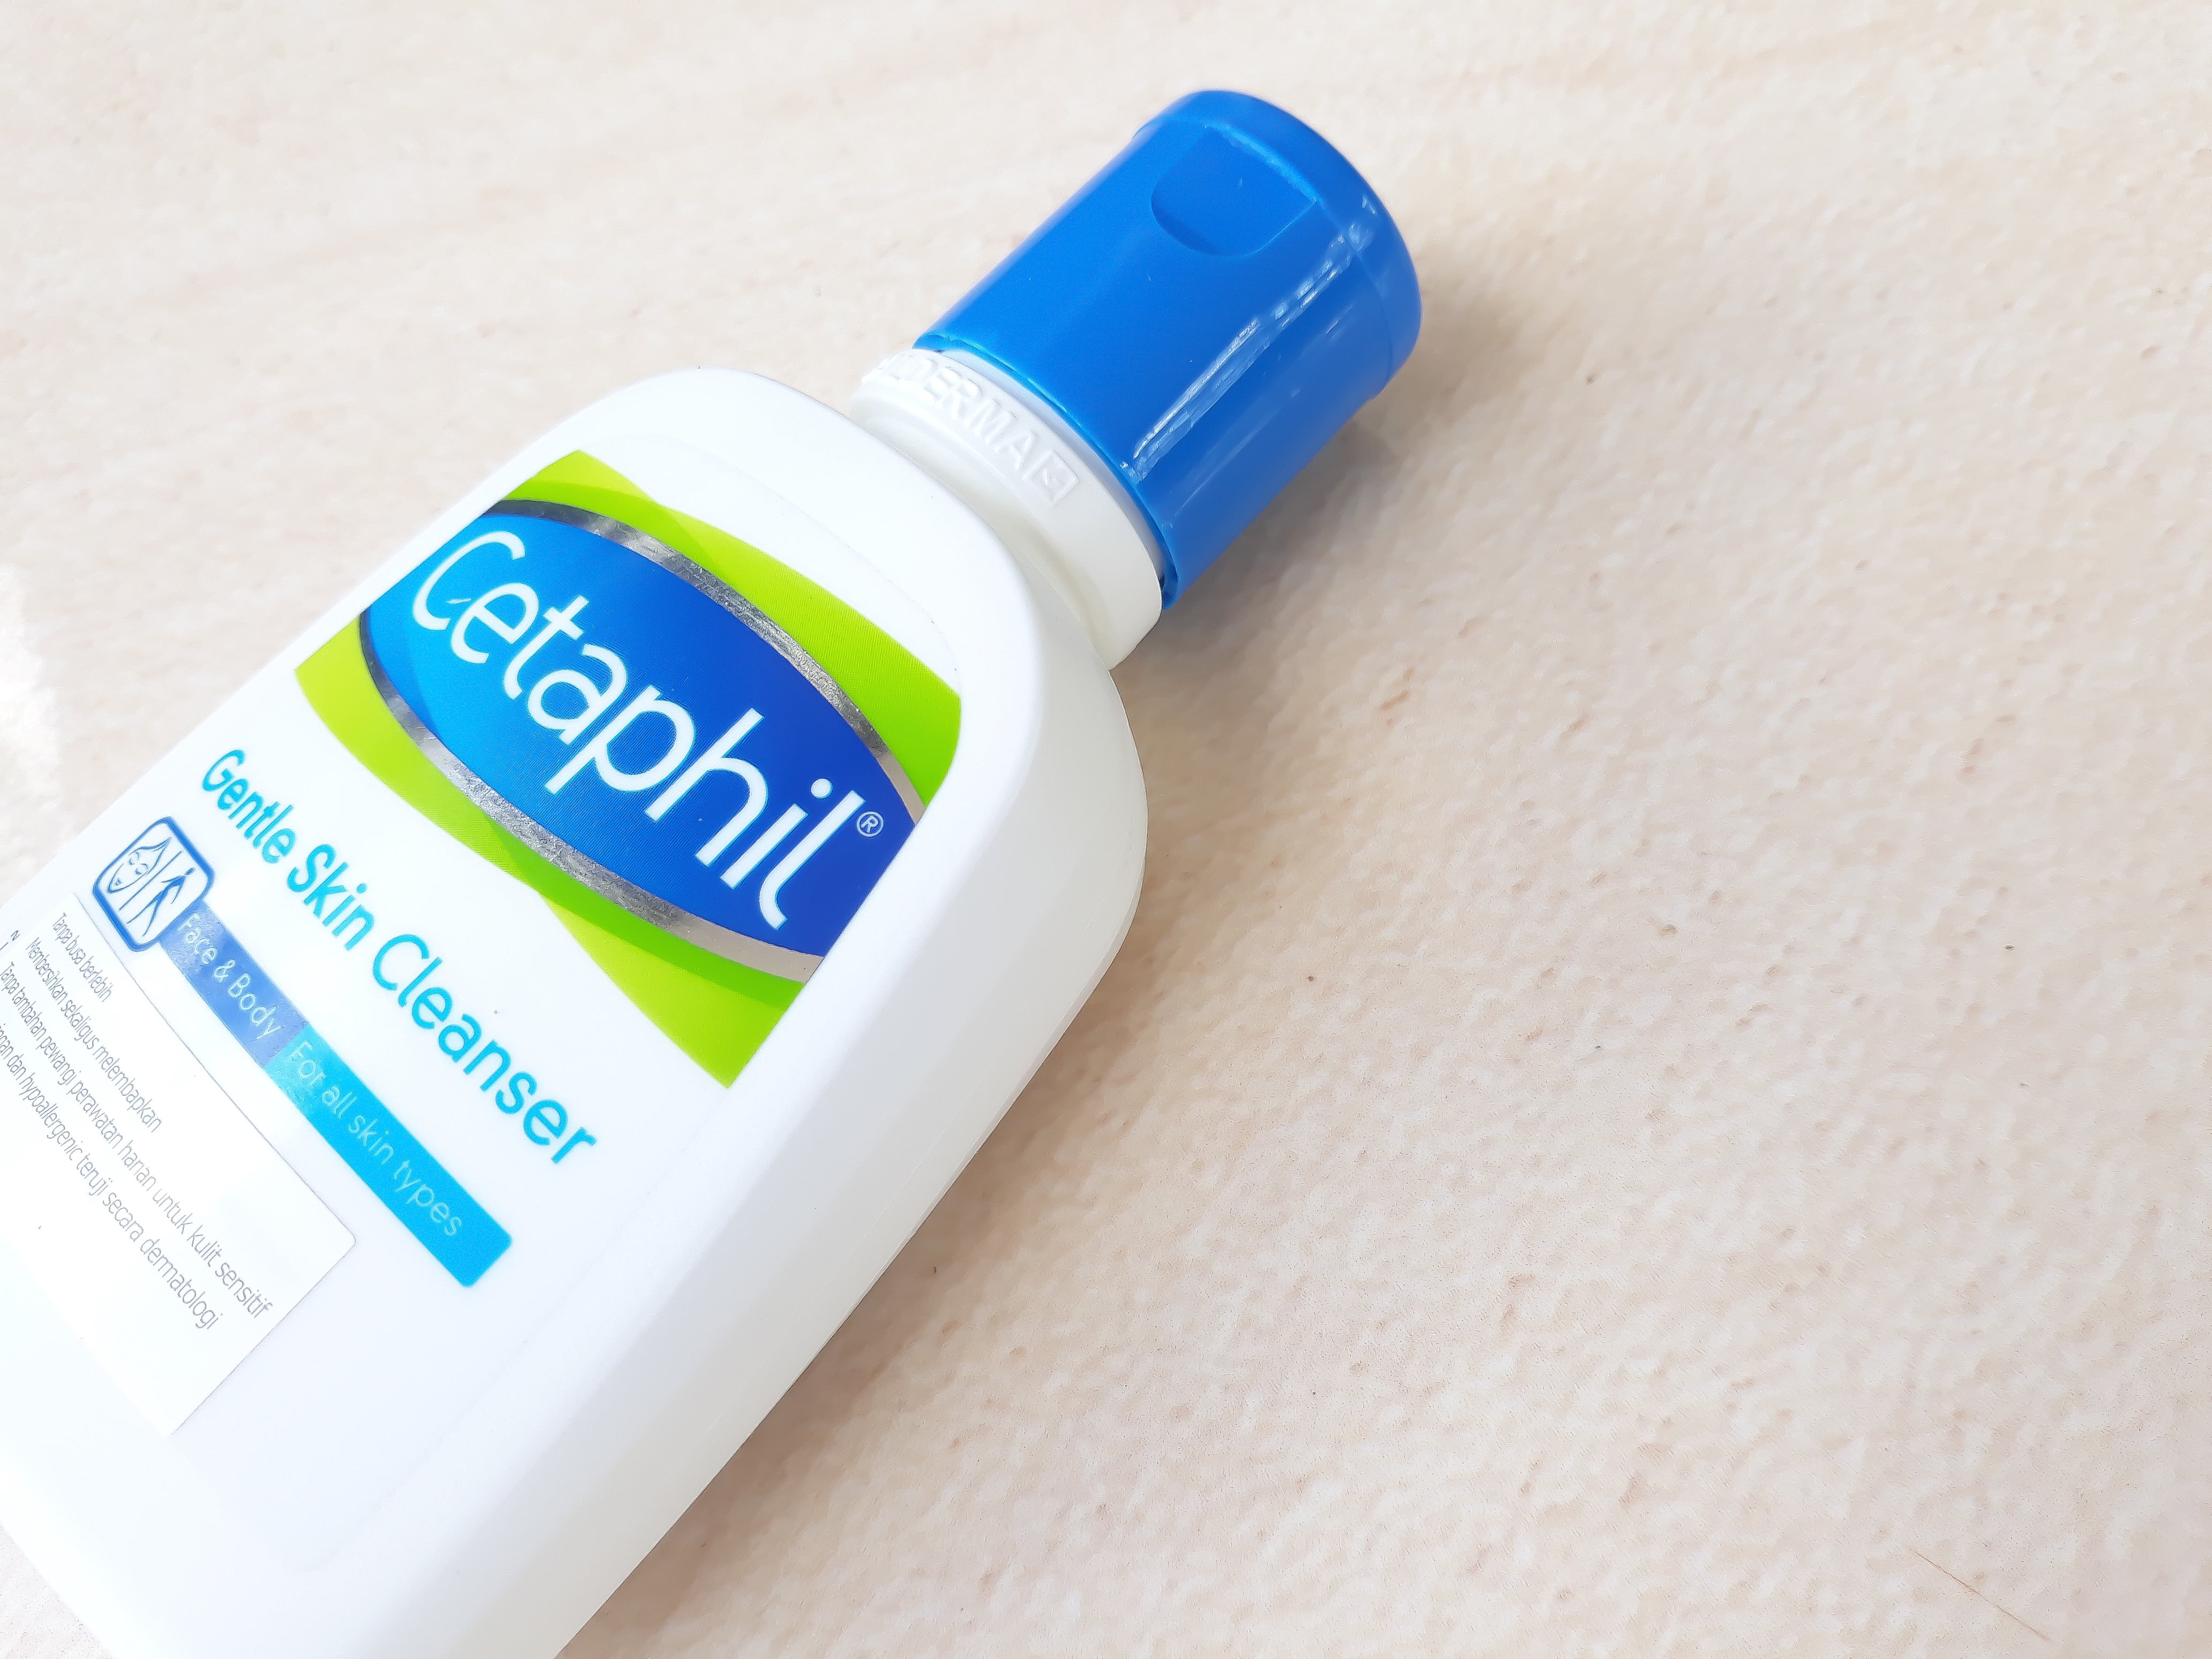 Stryx | Is Cetaphil Good Acne? Clear Your Skin